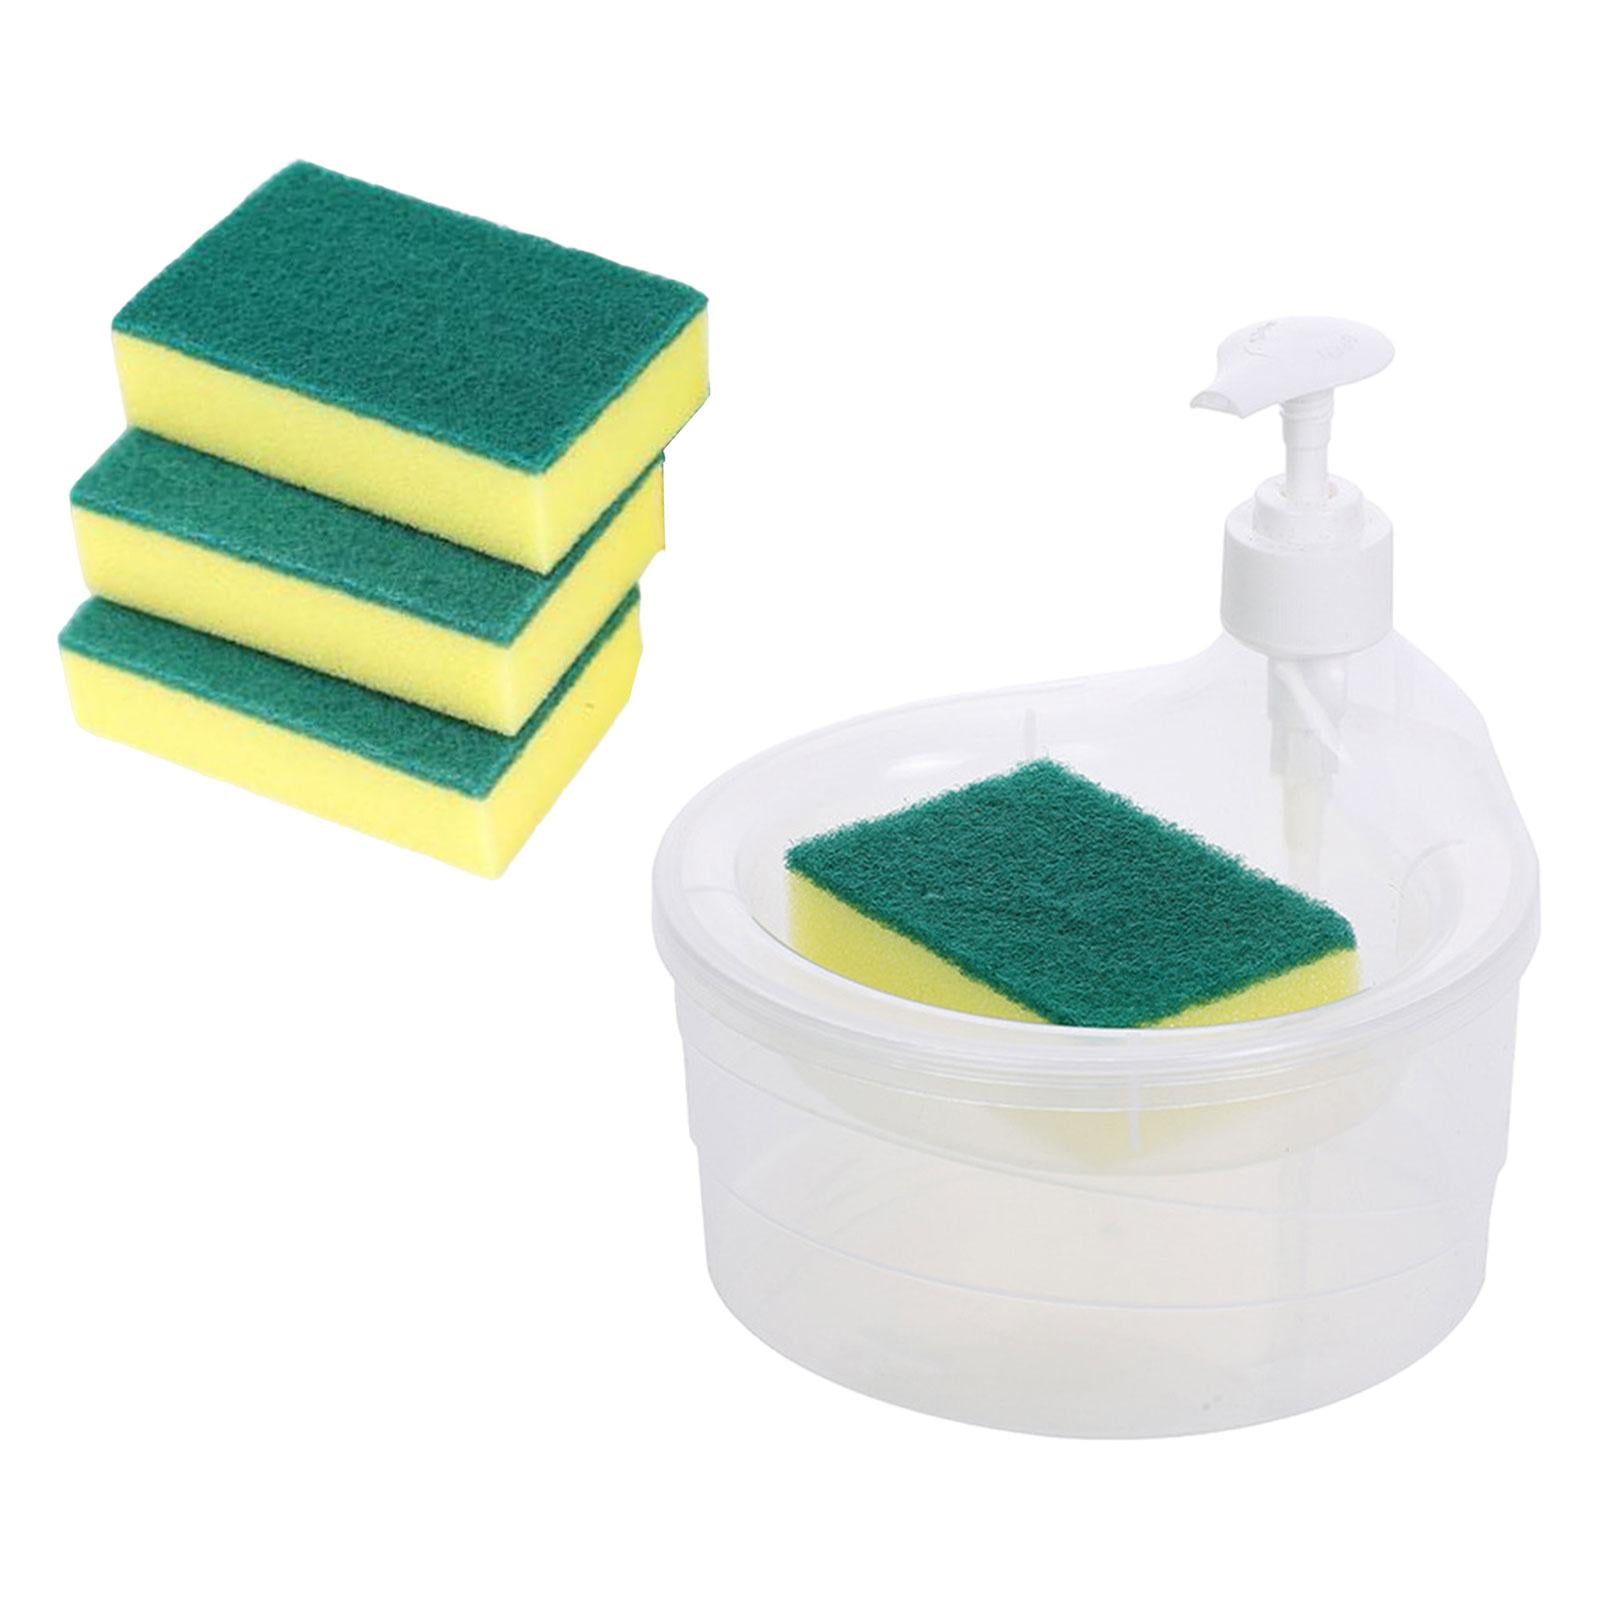 including Cleaning Sponge] Kitchen Cleaning Tool Set Including Dish Soap  Dispenser, Sponge And Scrubber, Automatic Soap Dispenser For Kitchen